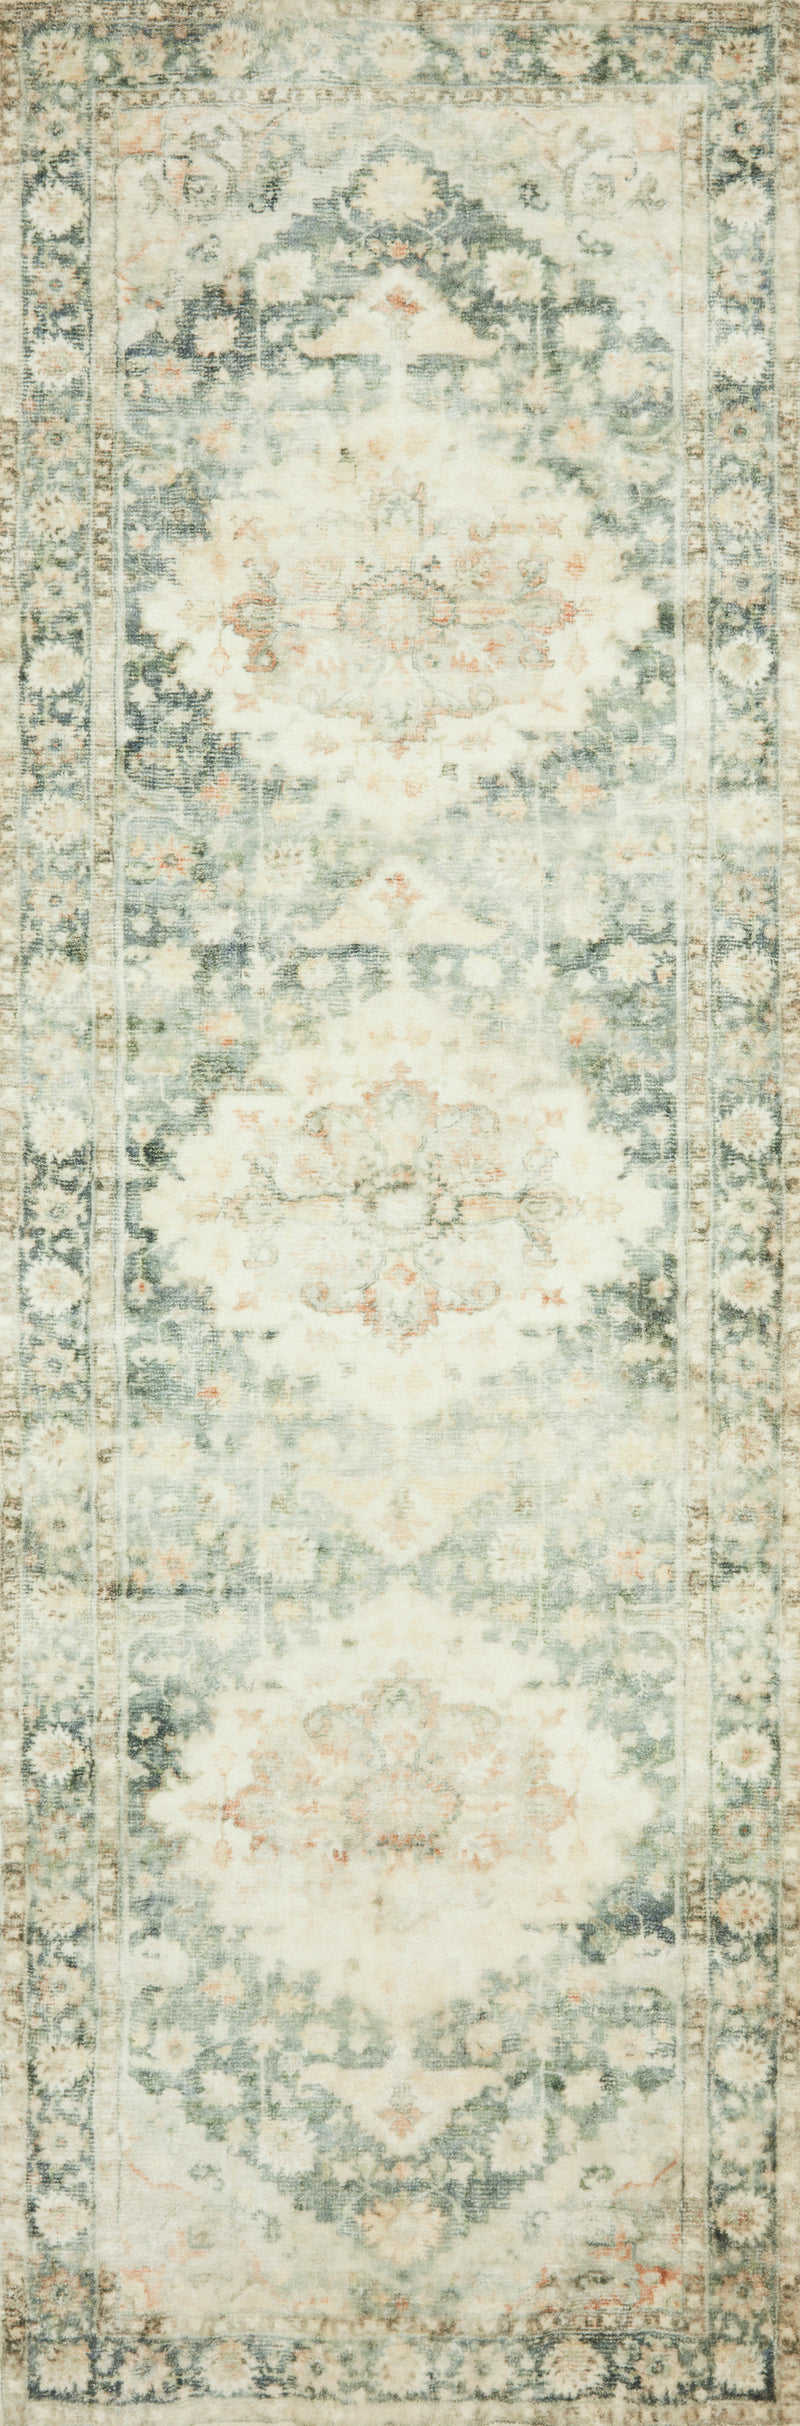 media image for Rosette Rug in Teal / Ivory by Loloi II 258